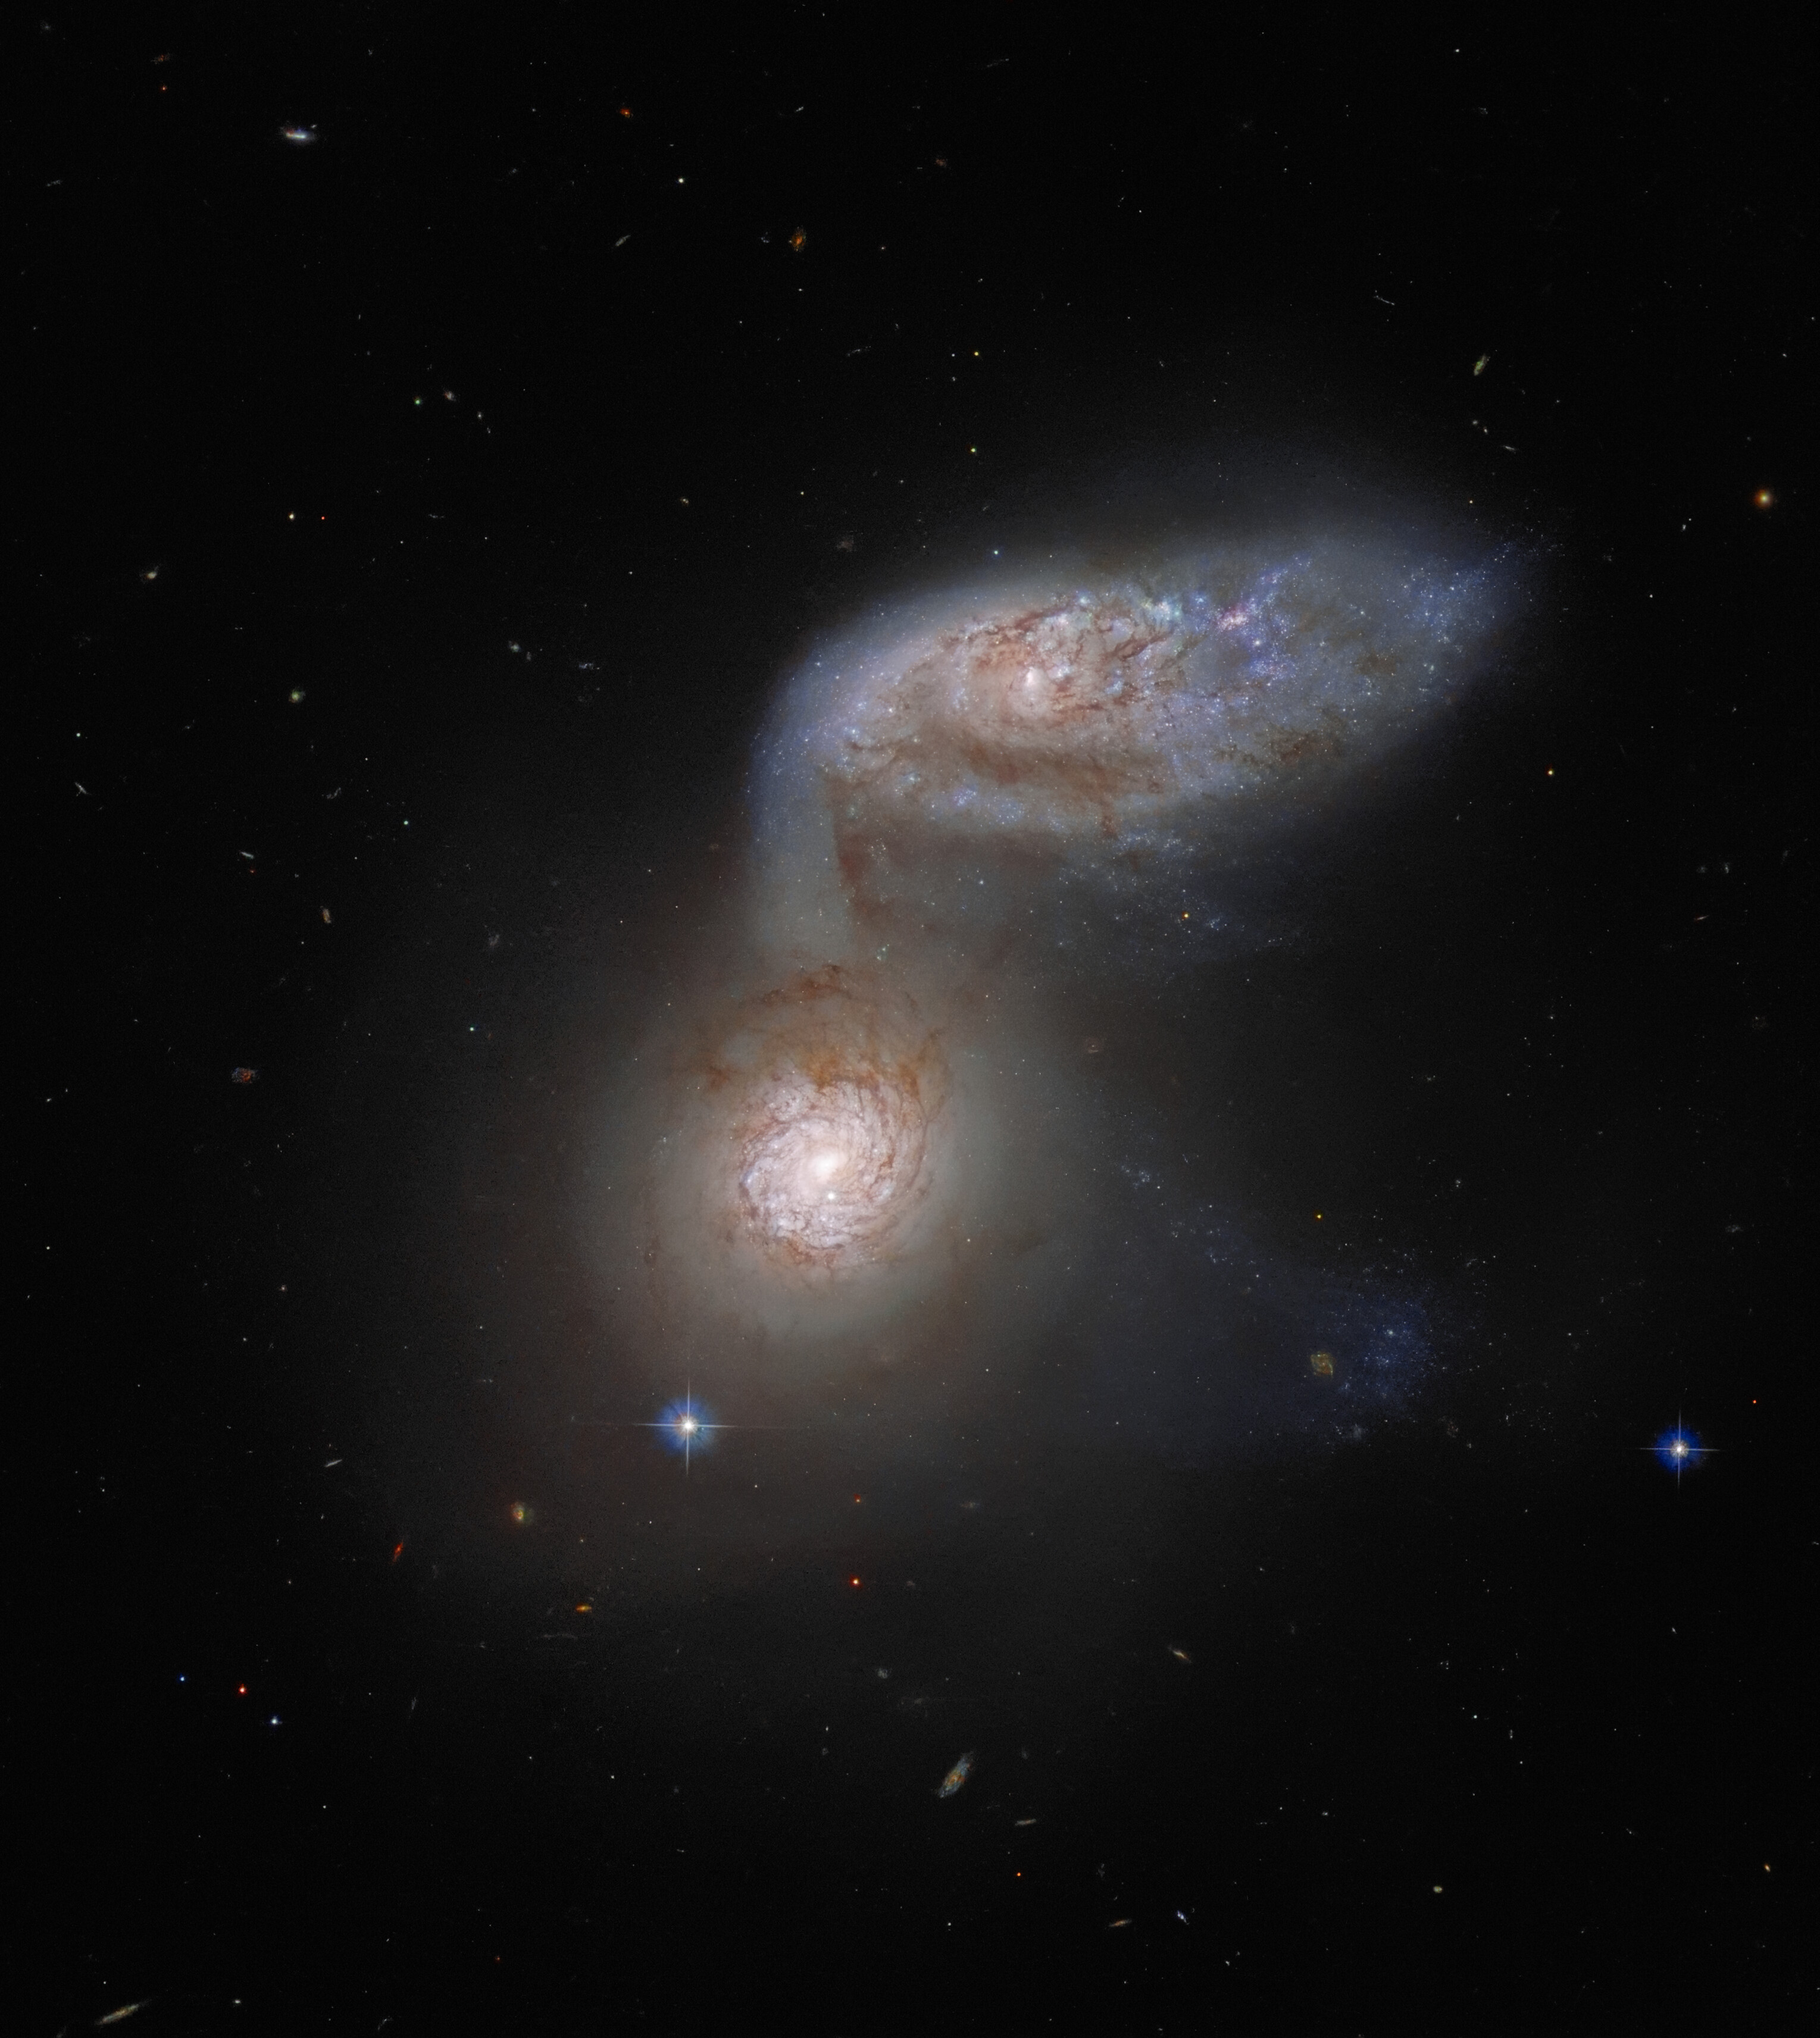 Galaxies Lose Structure in One Another’s Arms